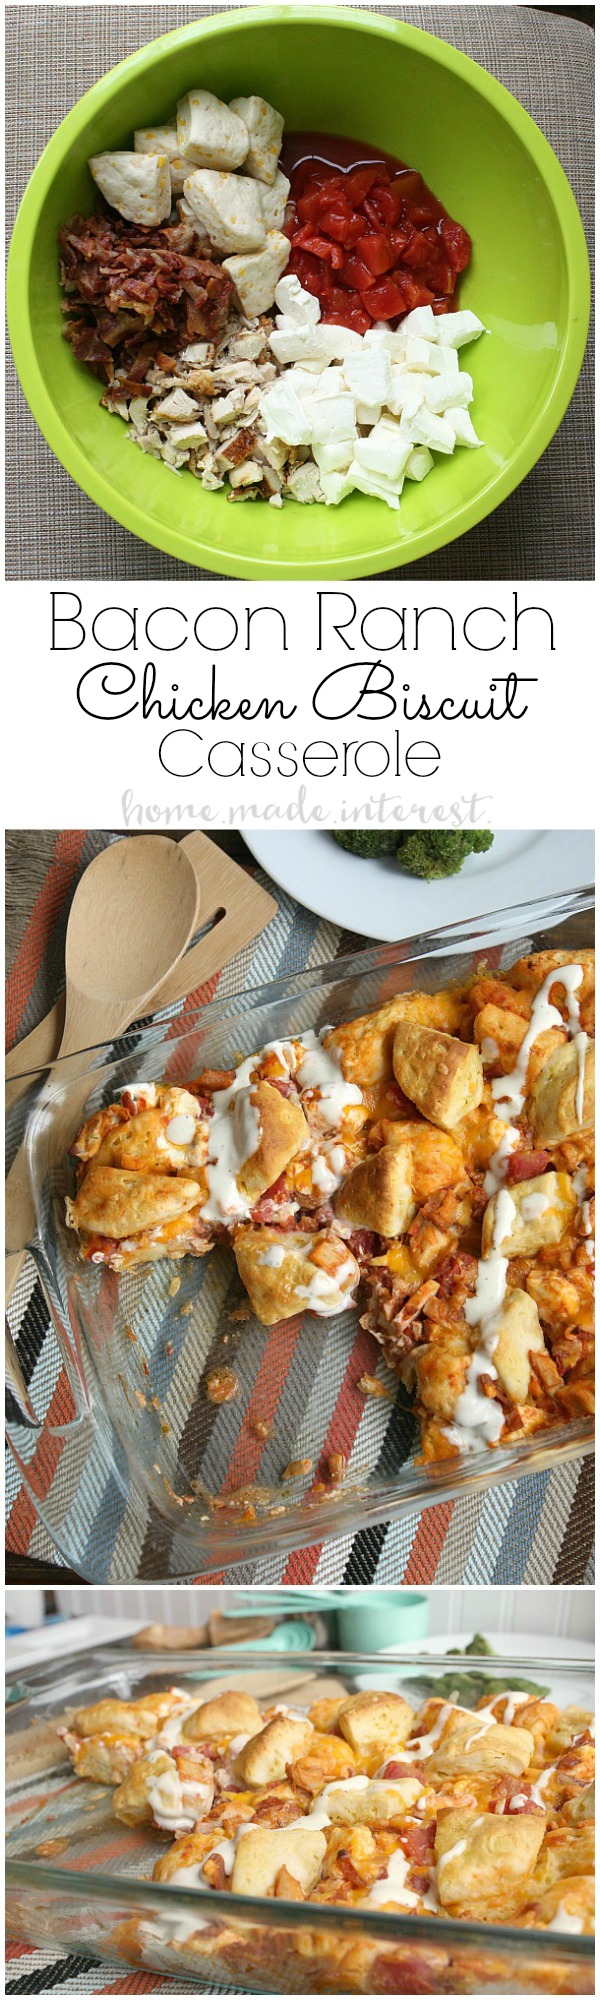 This tasty chicken casserole recipe is made with four of my favorite ingredients, rotisserie chicken, ranch dressing, bacon, and biscuits! 